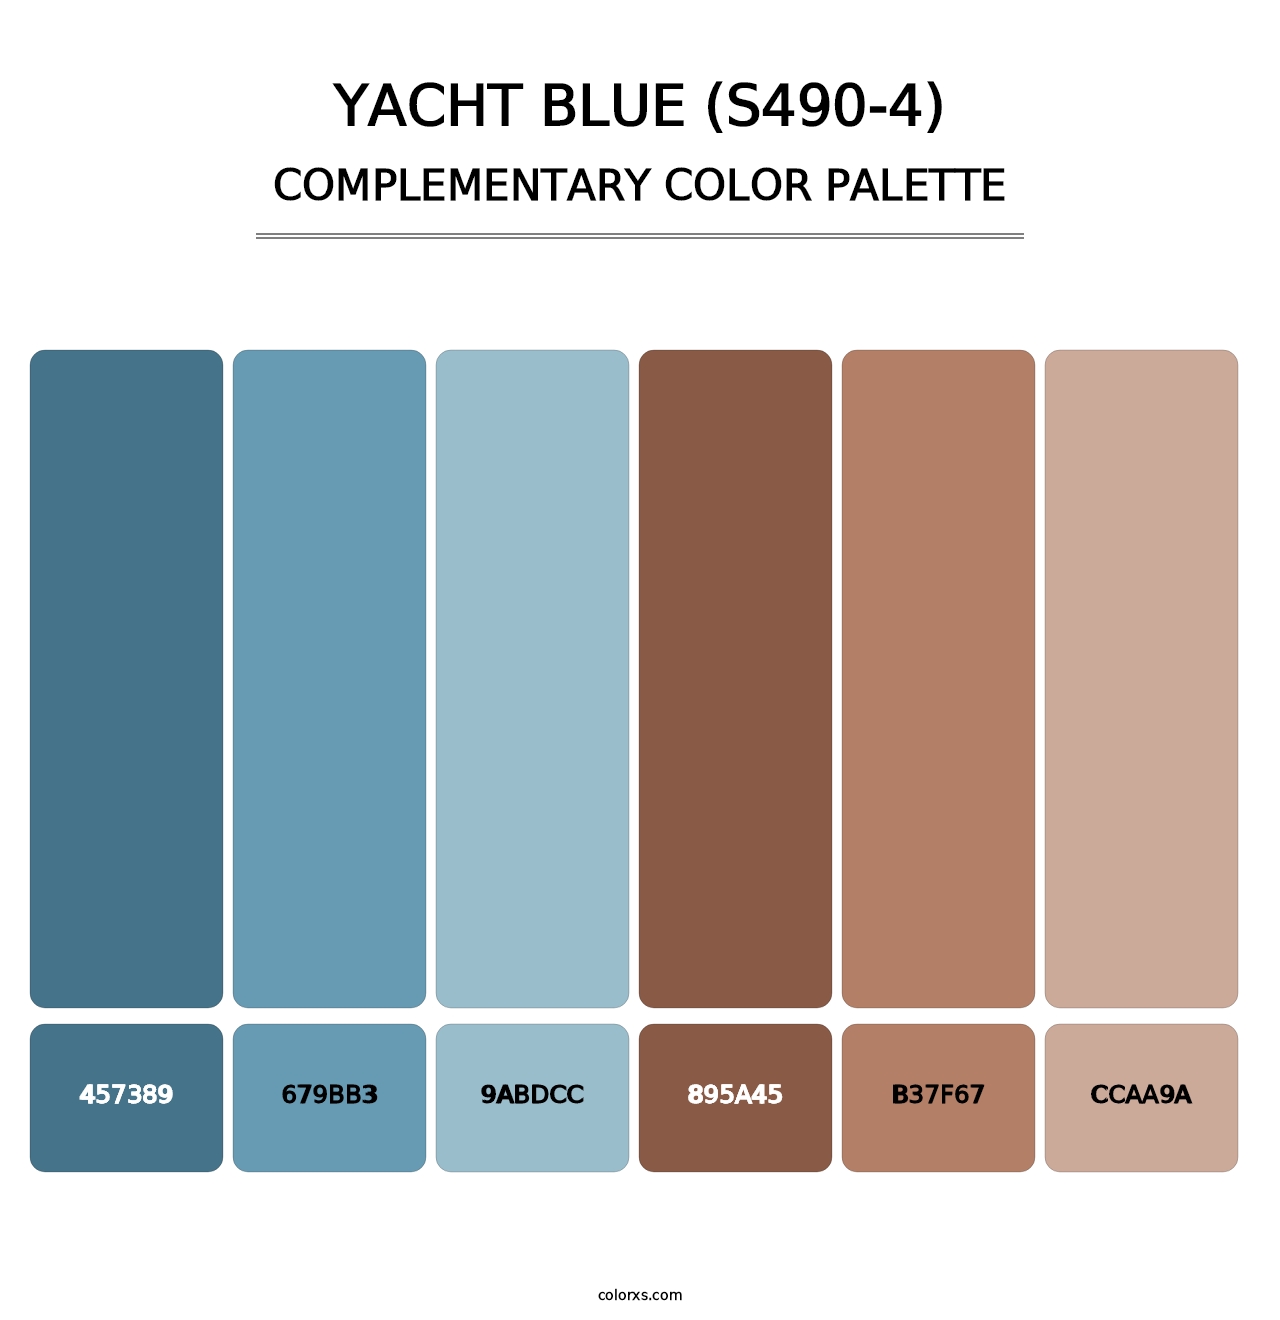 Yacht Blue (S490-4) - Complementary Color Palette